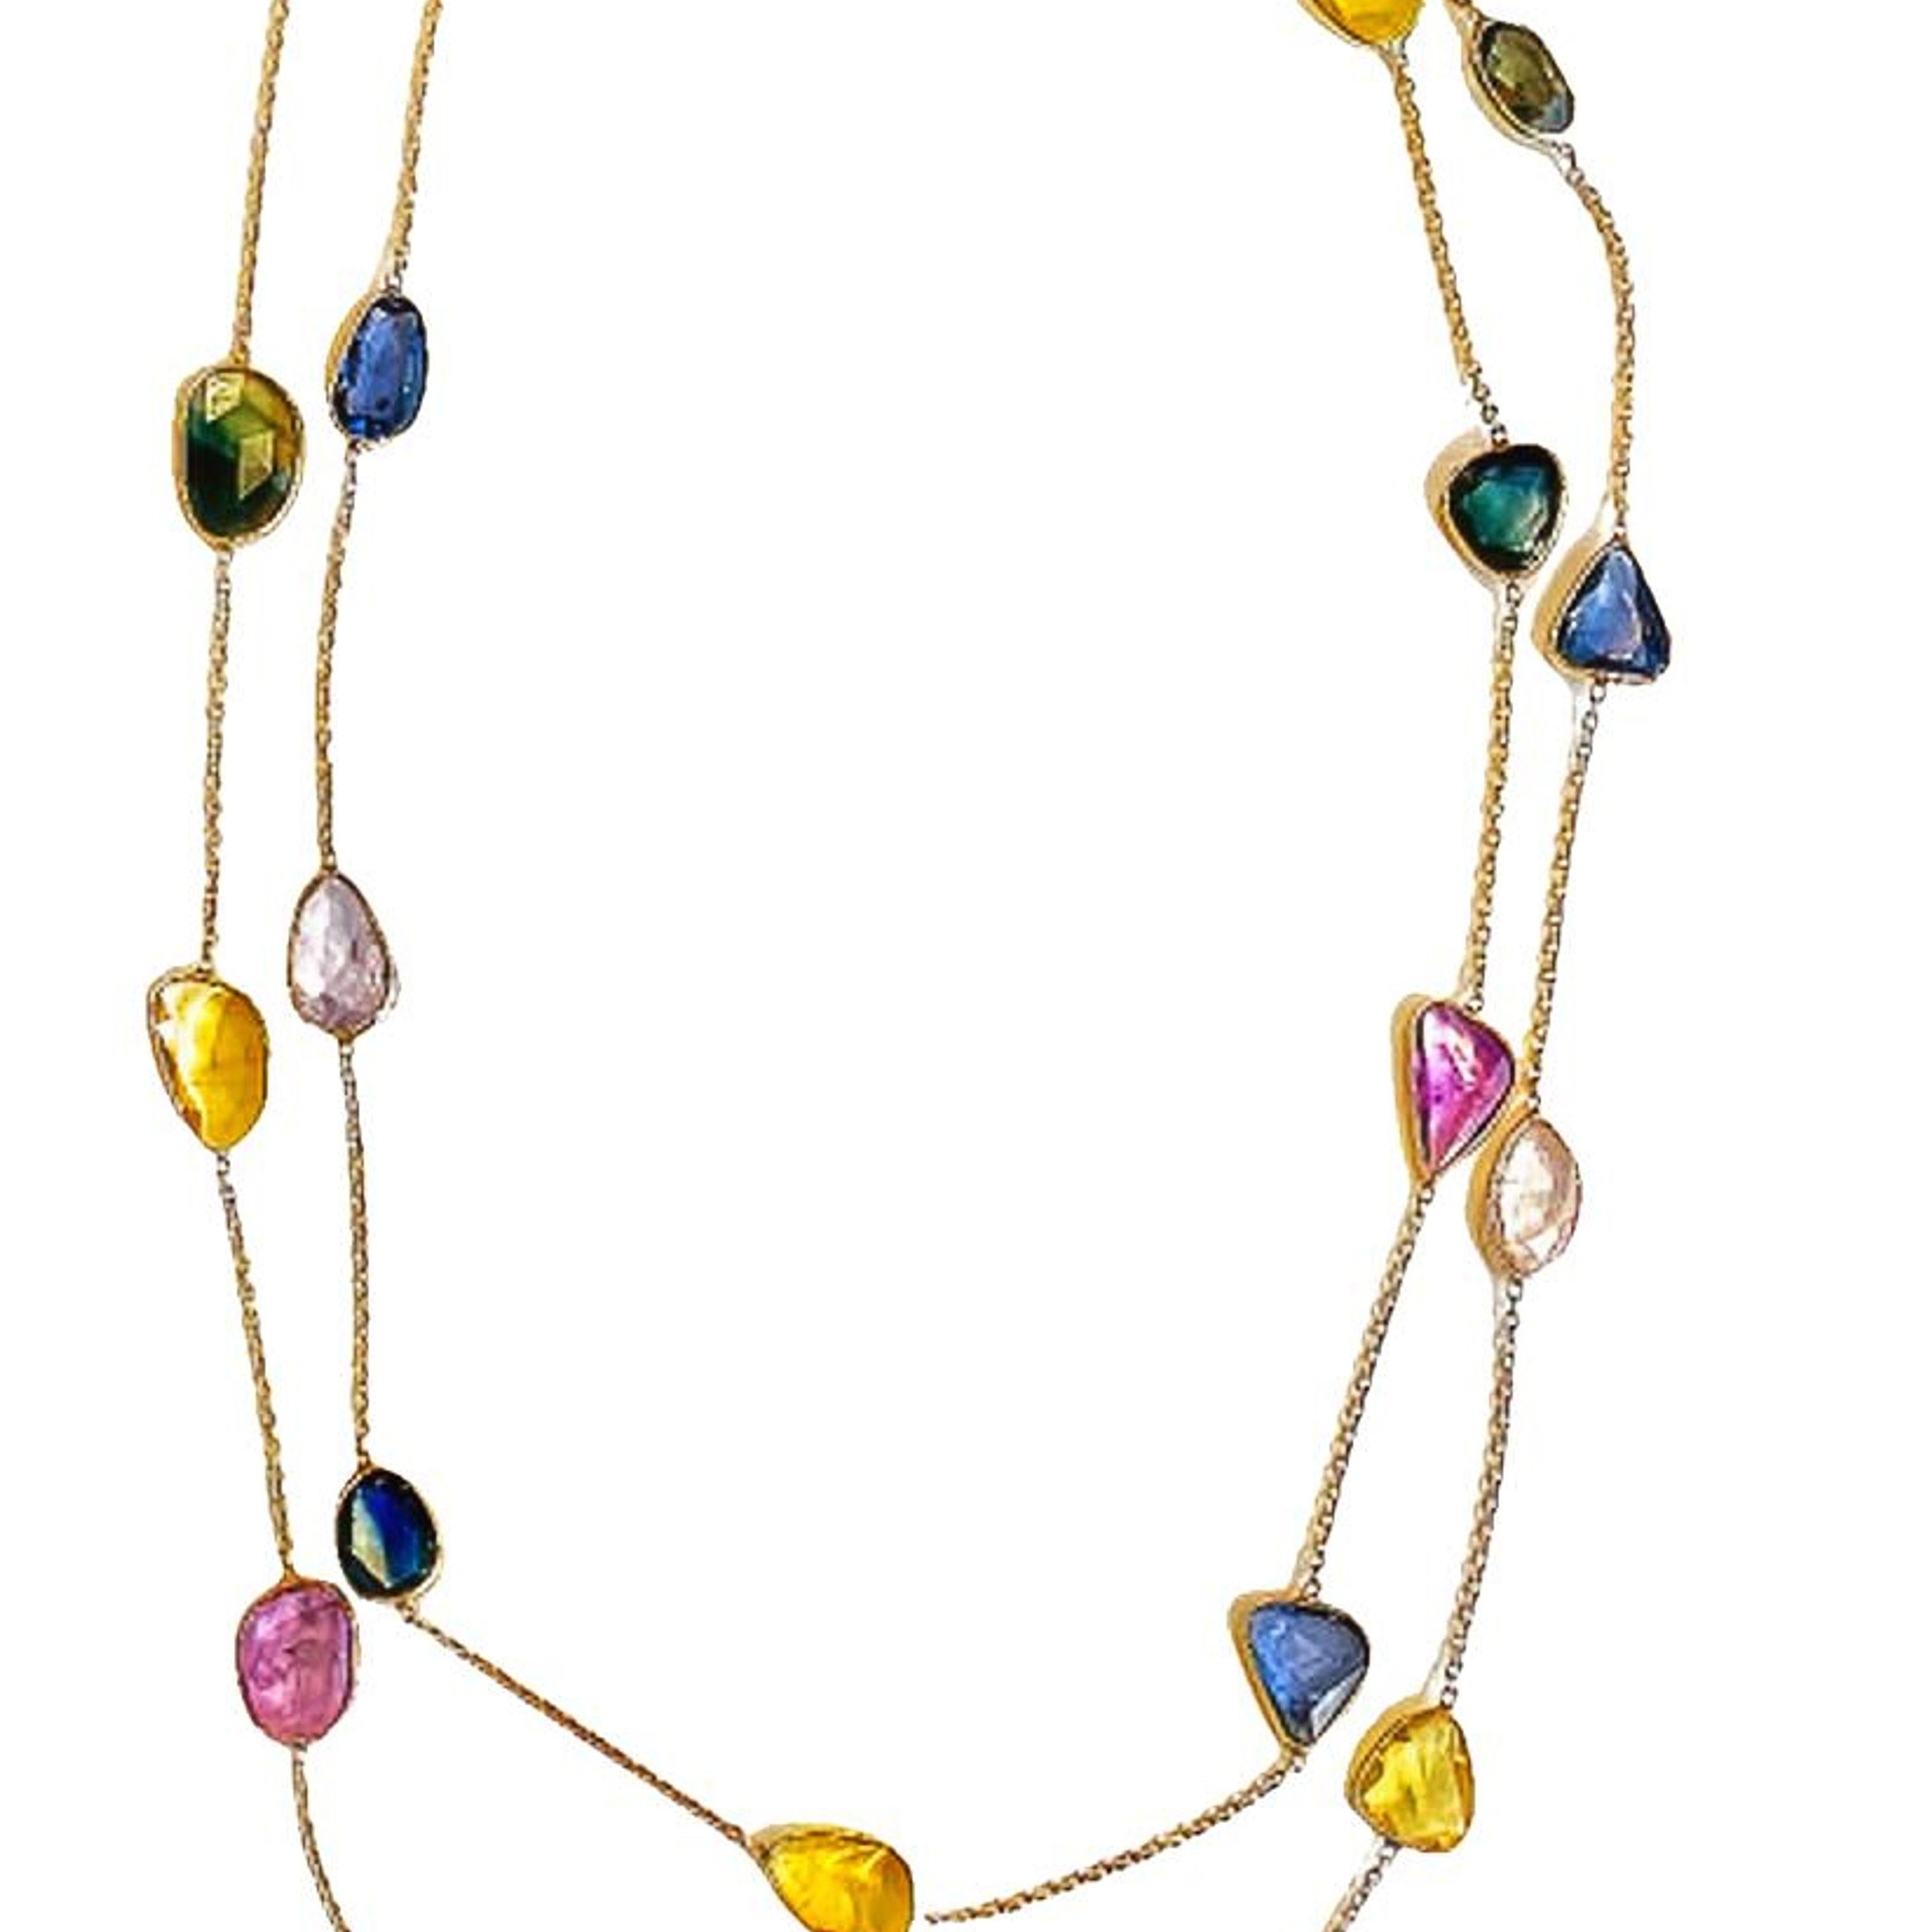 Fancy Sapphire comes in arrays of colors. And here is a gorgeous way to show them all in our signature station necklace. Each gem is set by hand in fine bezel to accentuate the natural color of these gems. This 18 karat yellow gold station necklace